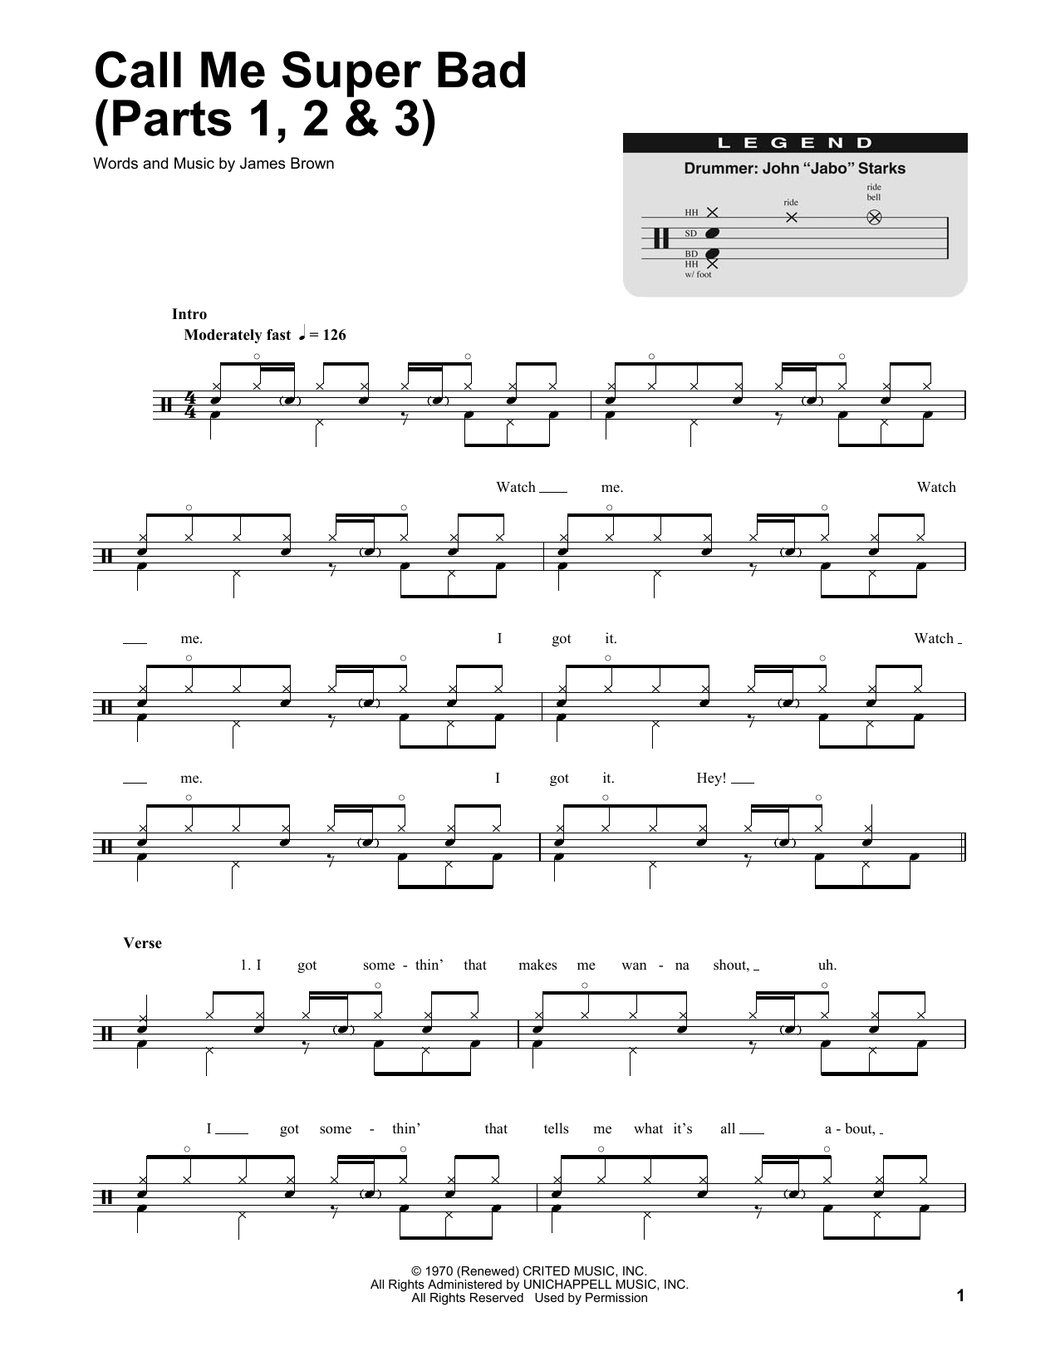 Call Me Super Bad (Parts 1, 2 & 3) - James Brown - Full Drum Transcription / Drum Sheet Music - SheetMusicDirect DT